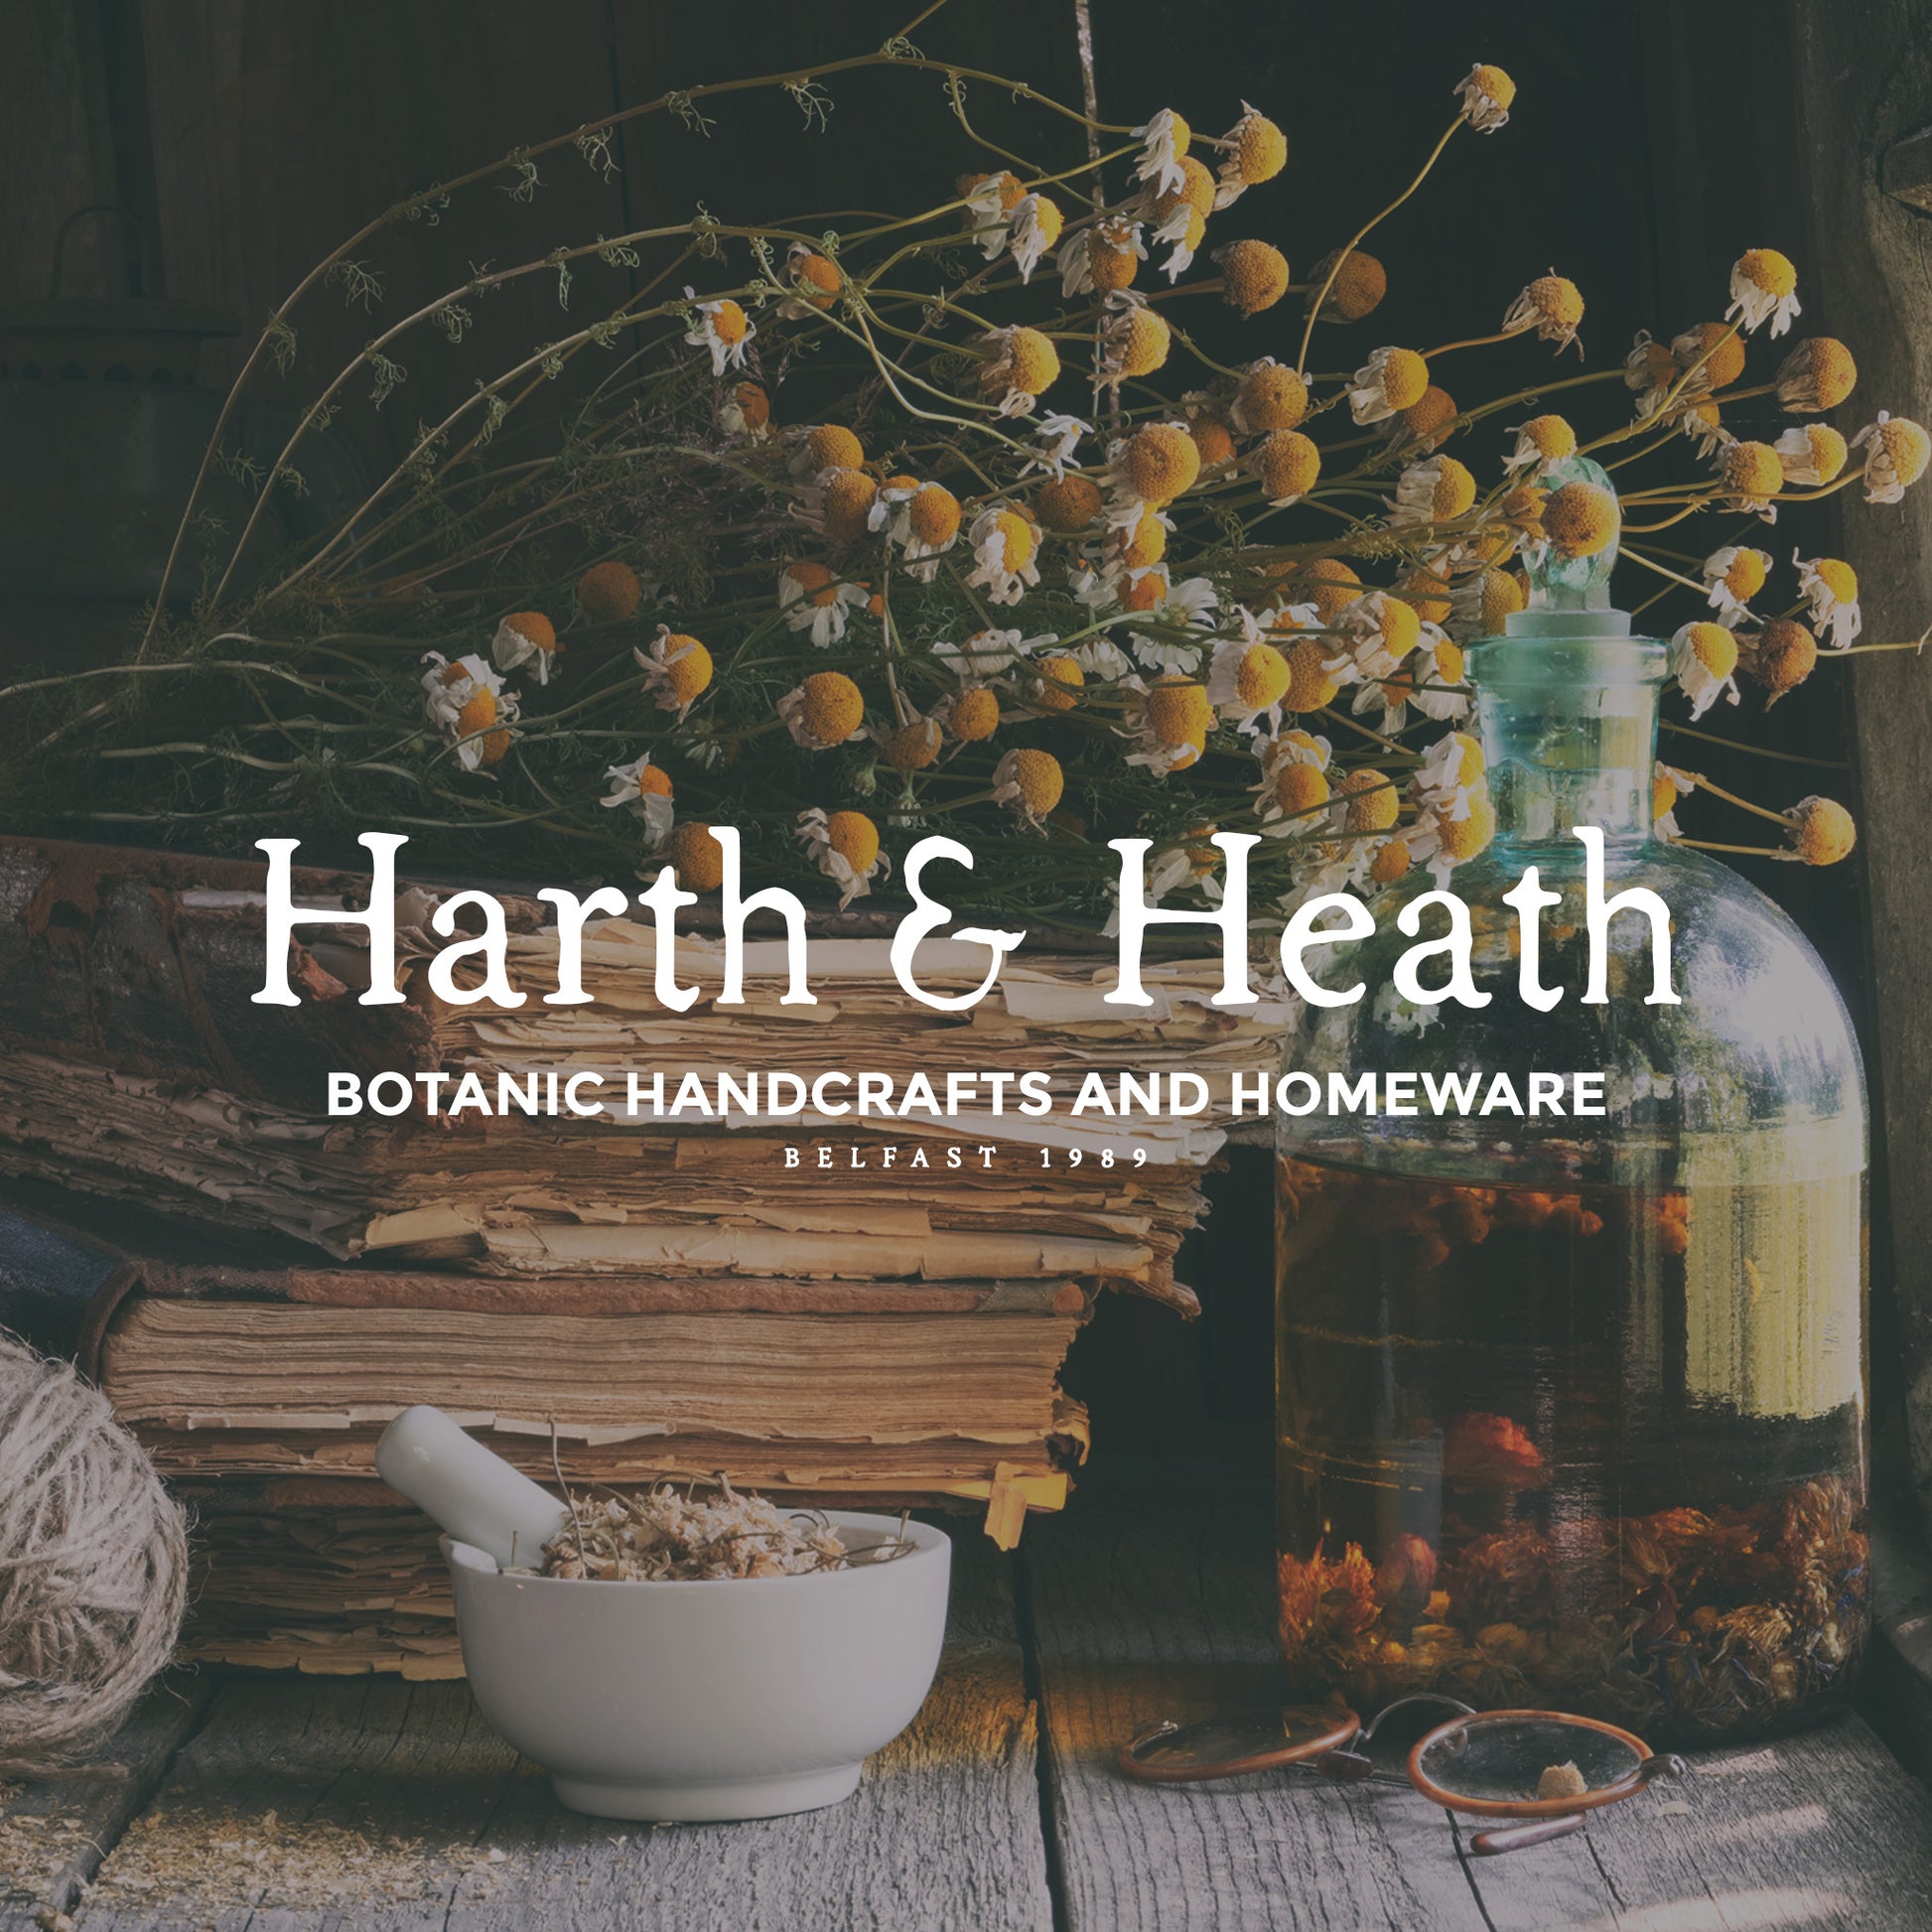 Image of apothecary table and the name Harth and Heath written on top using the Folklore font